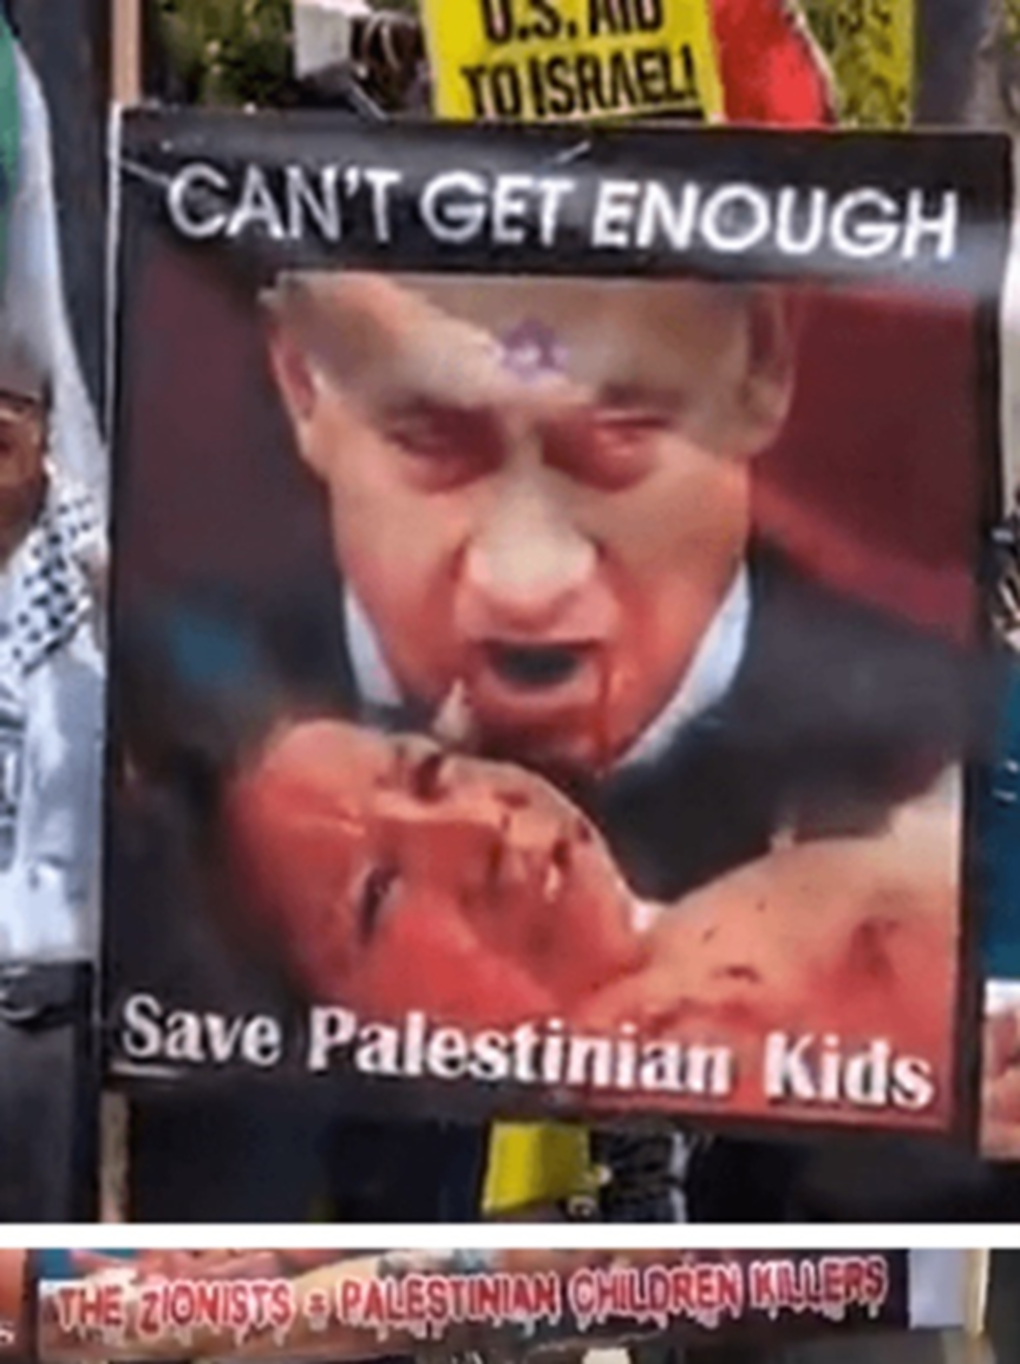 Anti-Zionism as Antisemitism: How Anti-Zionist Language from the Left and Right Vilifies Jews